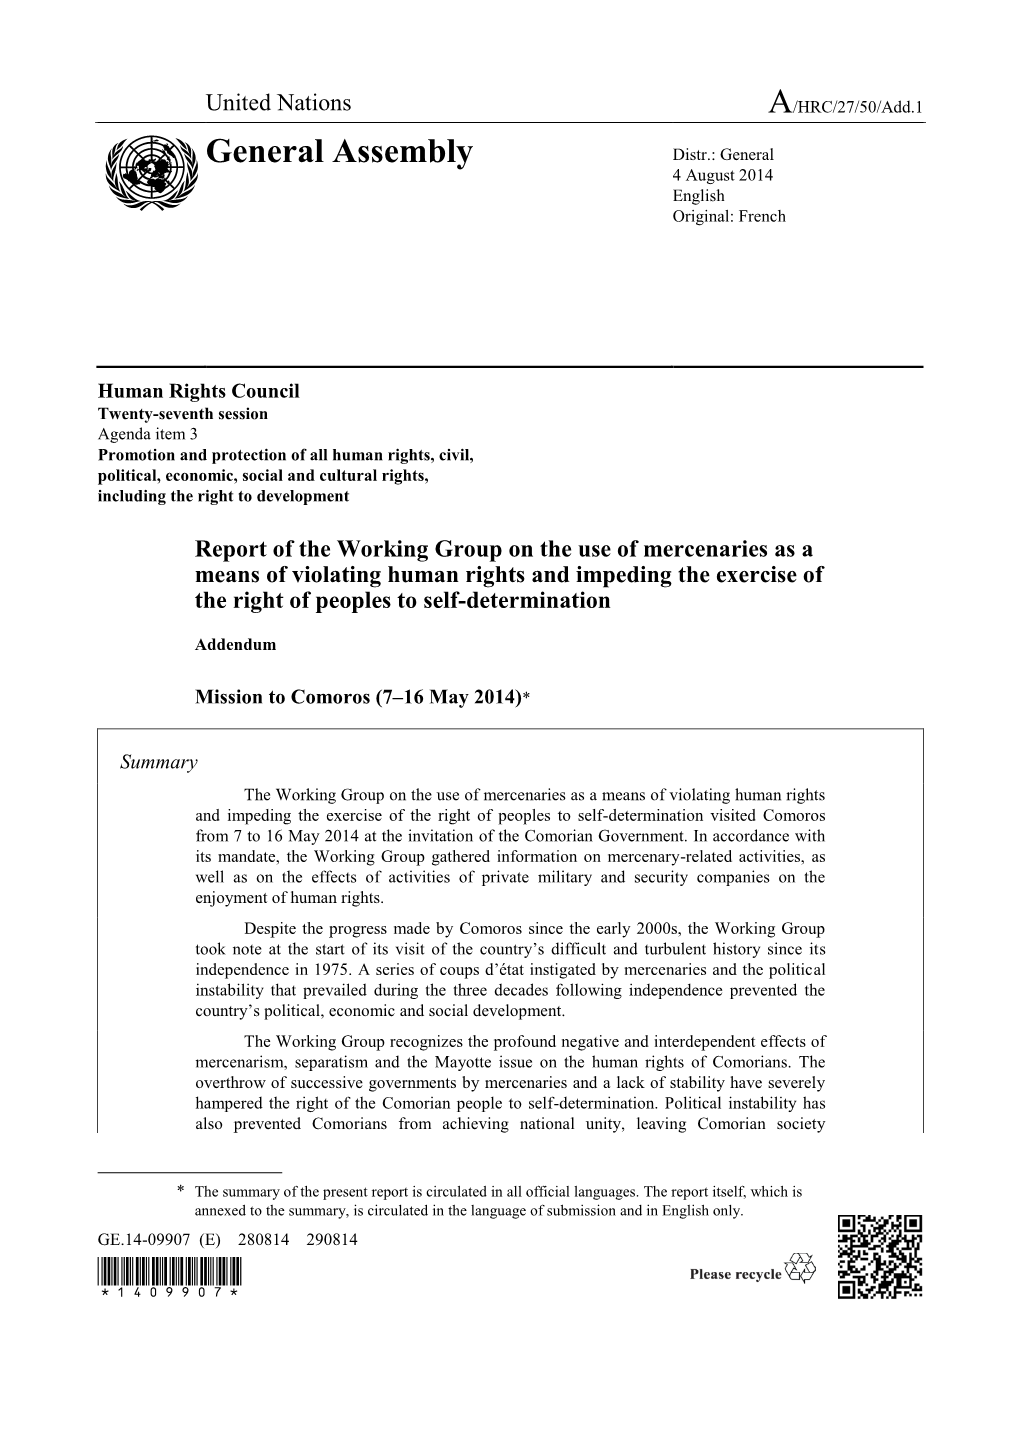 Report of the Working Group on the Use of Mercenaries As a Means of Violating Human Rights and Impeding the Exercise of the Right of Peoples to Self-Determination